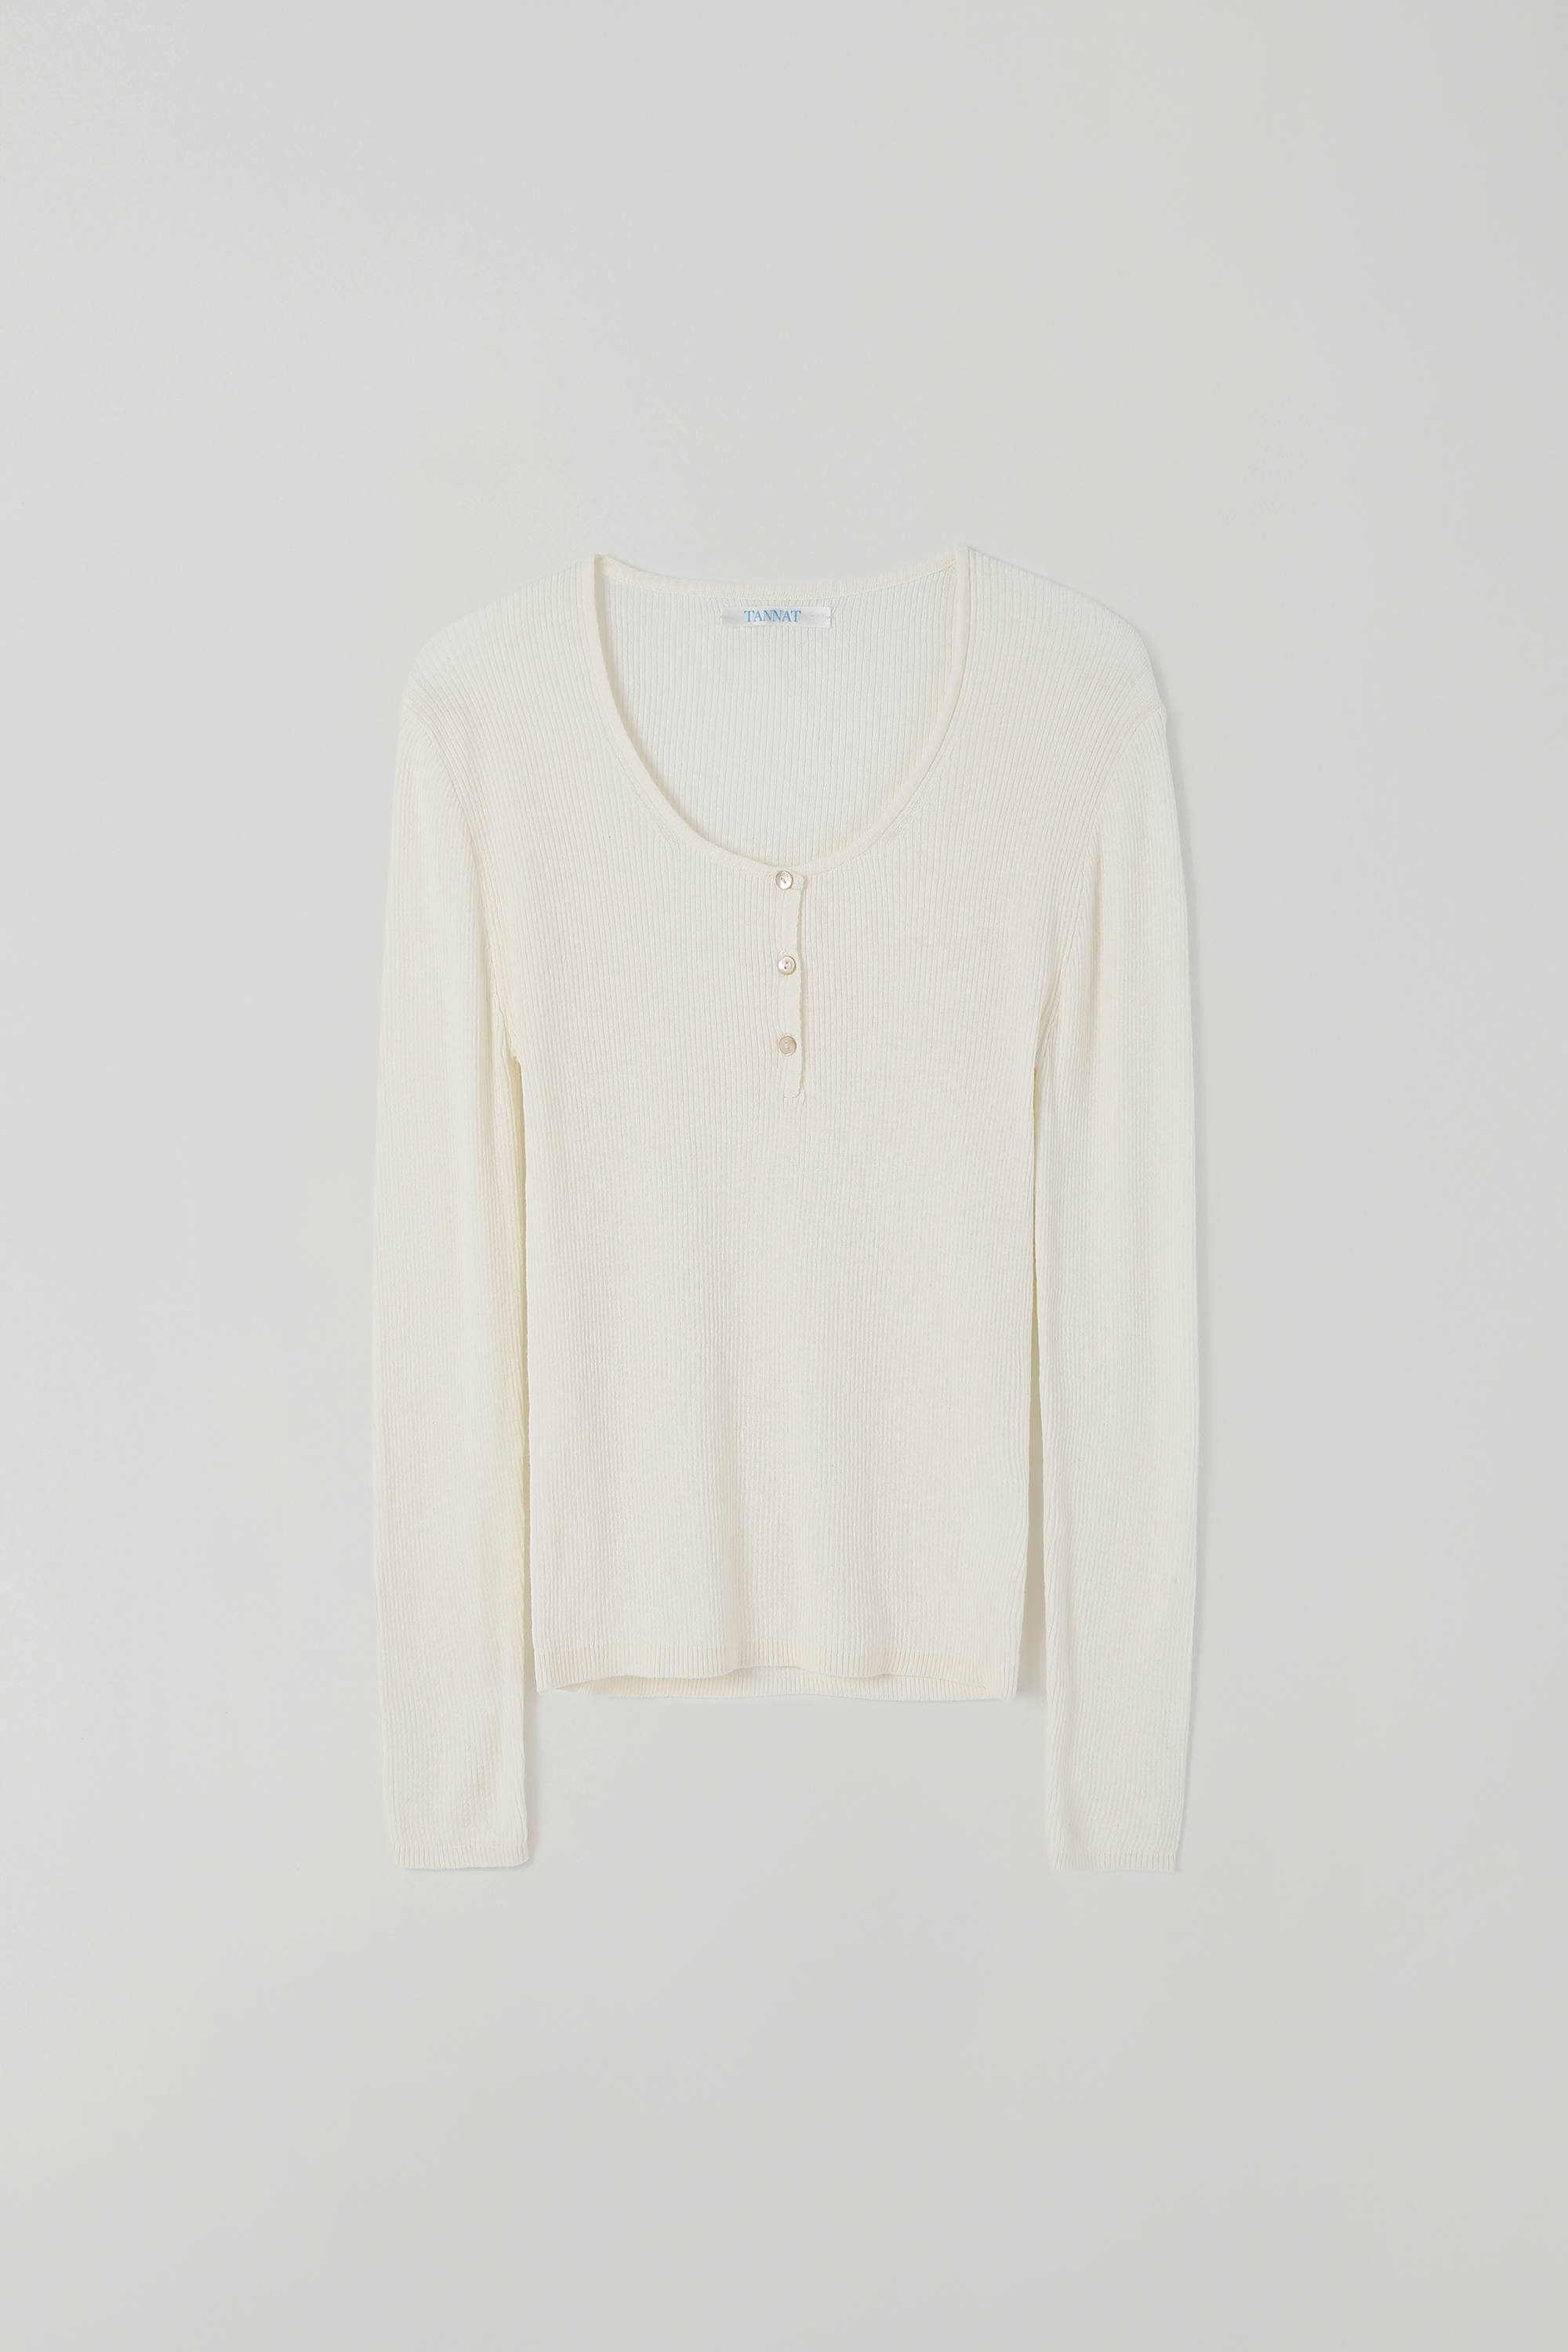 (1st re-stock) T/T Button sheer knit top (ivory)